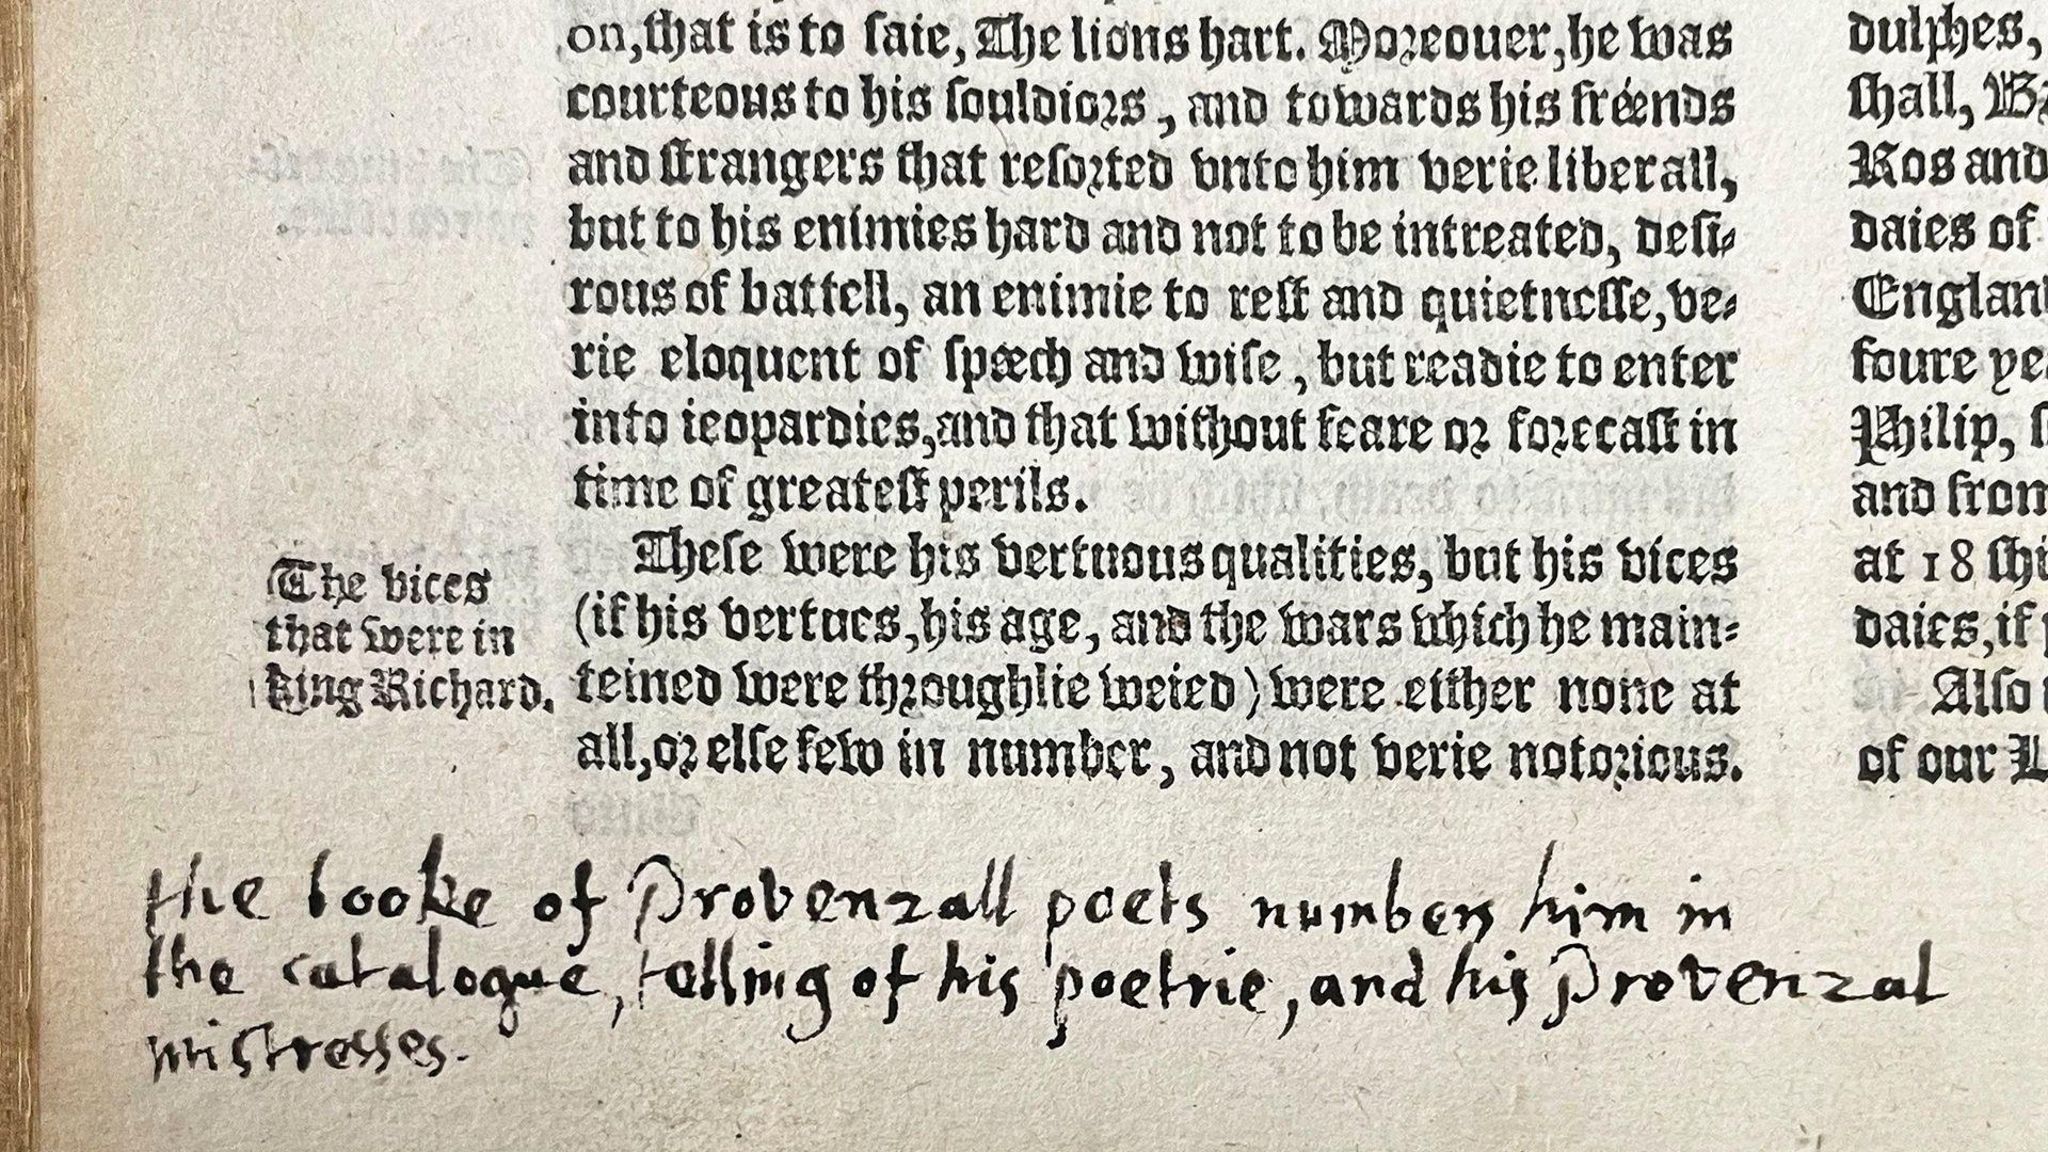 Text annotated by poet John Milton